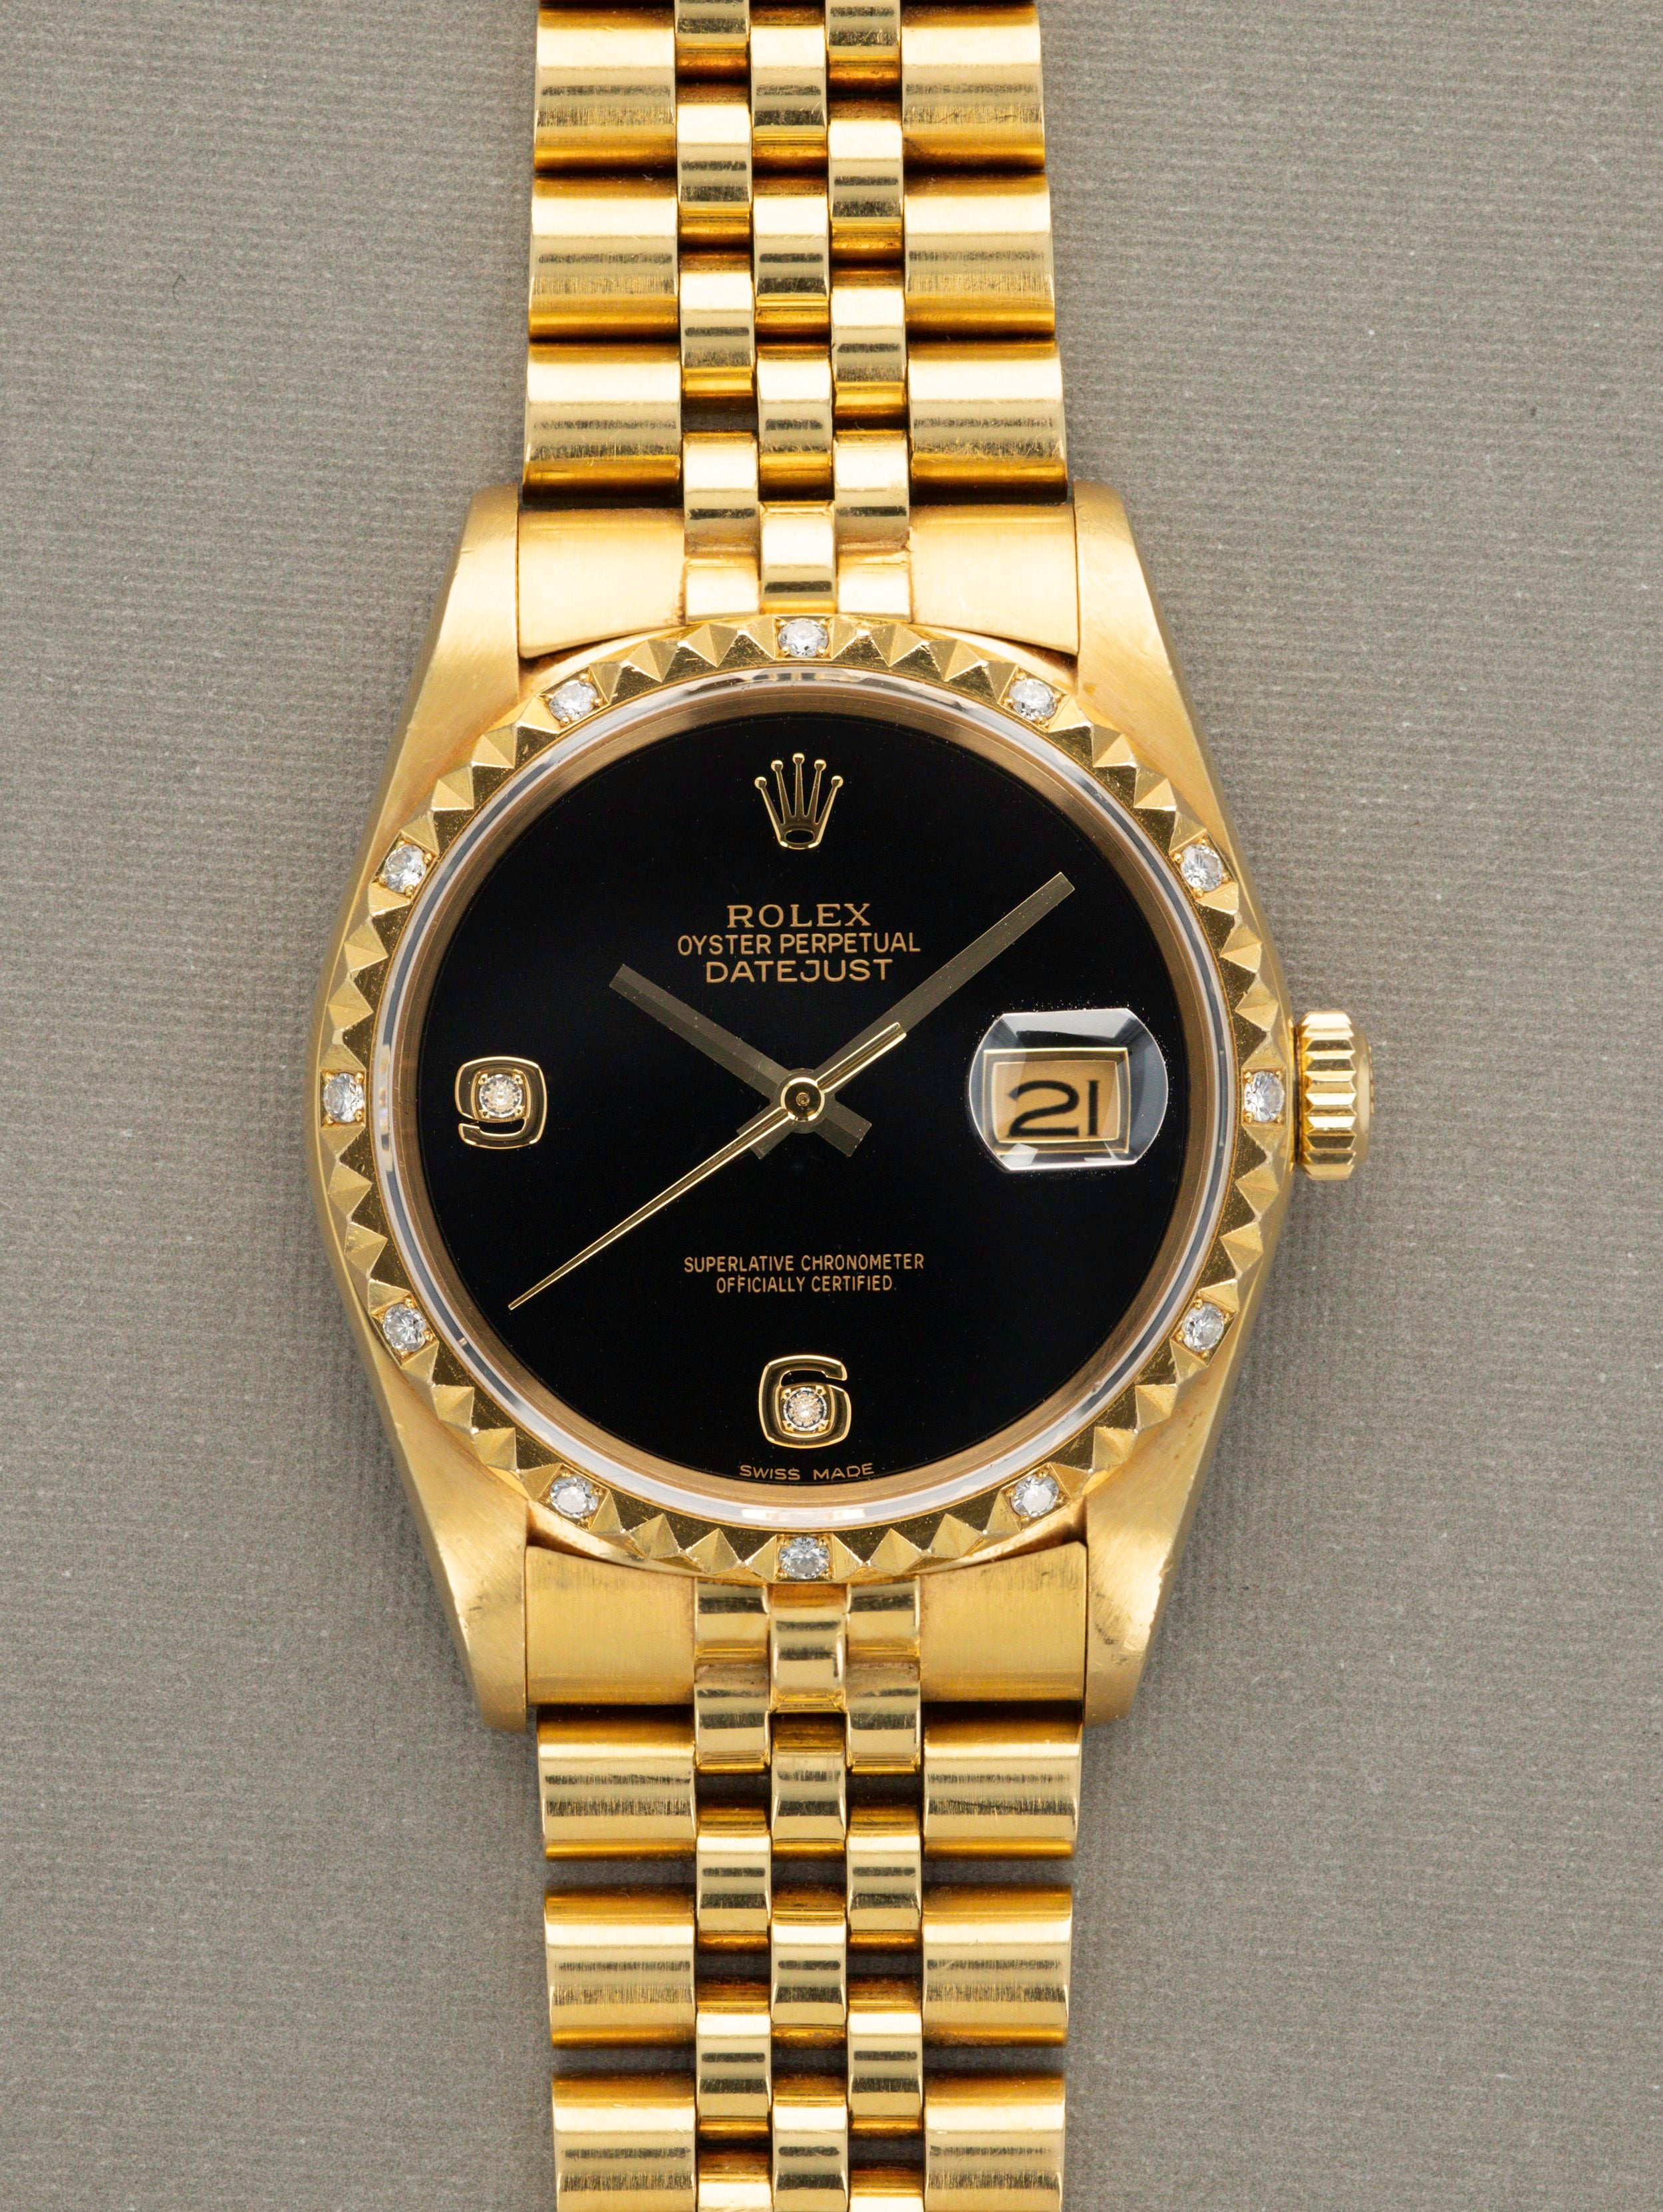 Rolex Datejust Ref. 16058 - Pyramid Bezel, and Onyx Dial with Diamond Indices